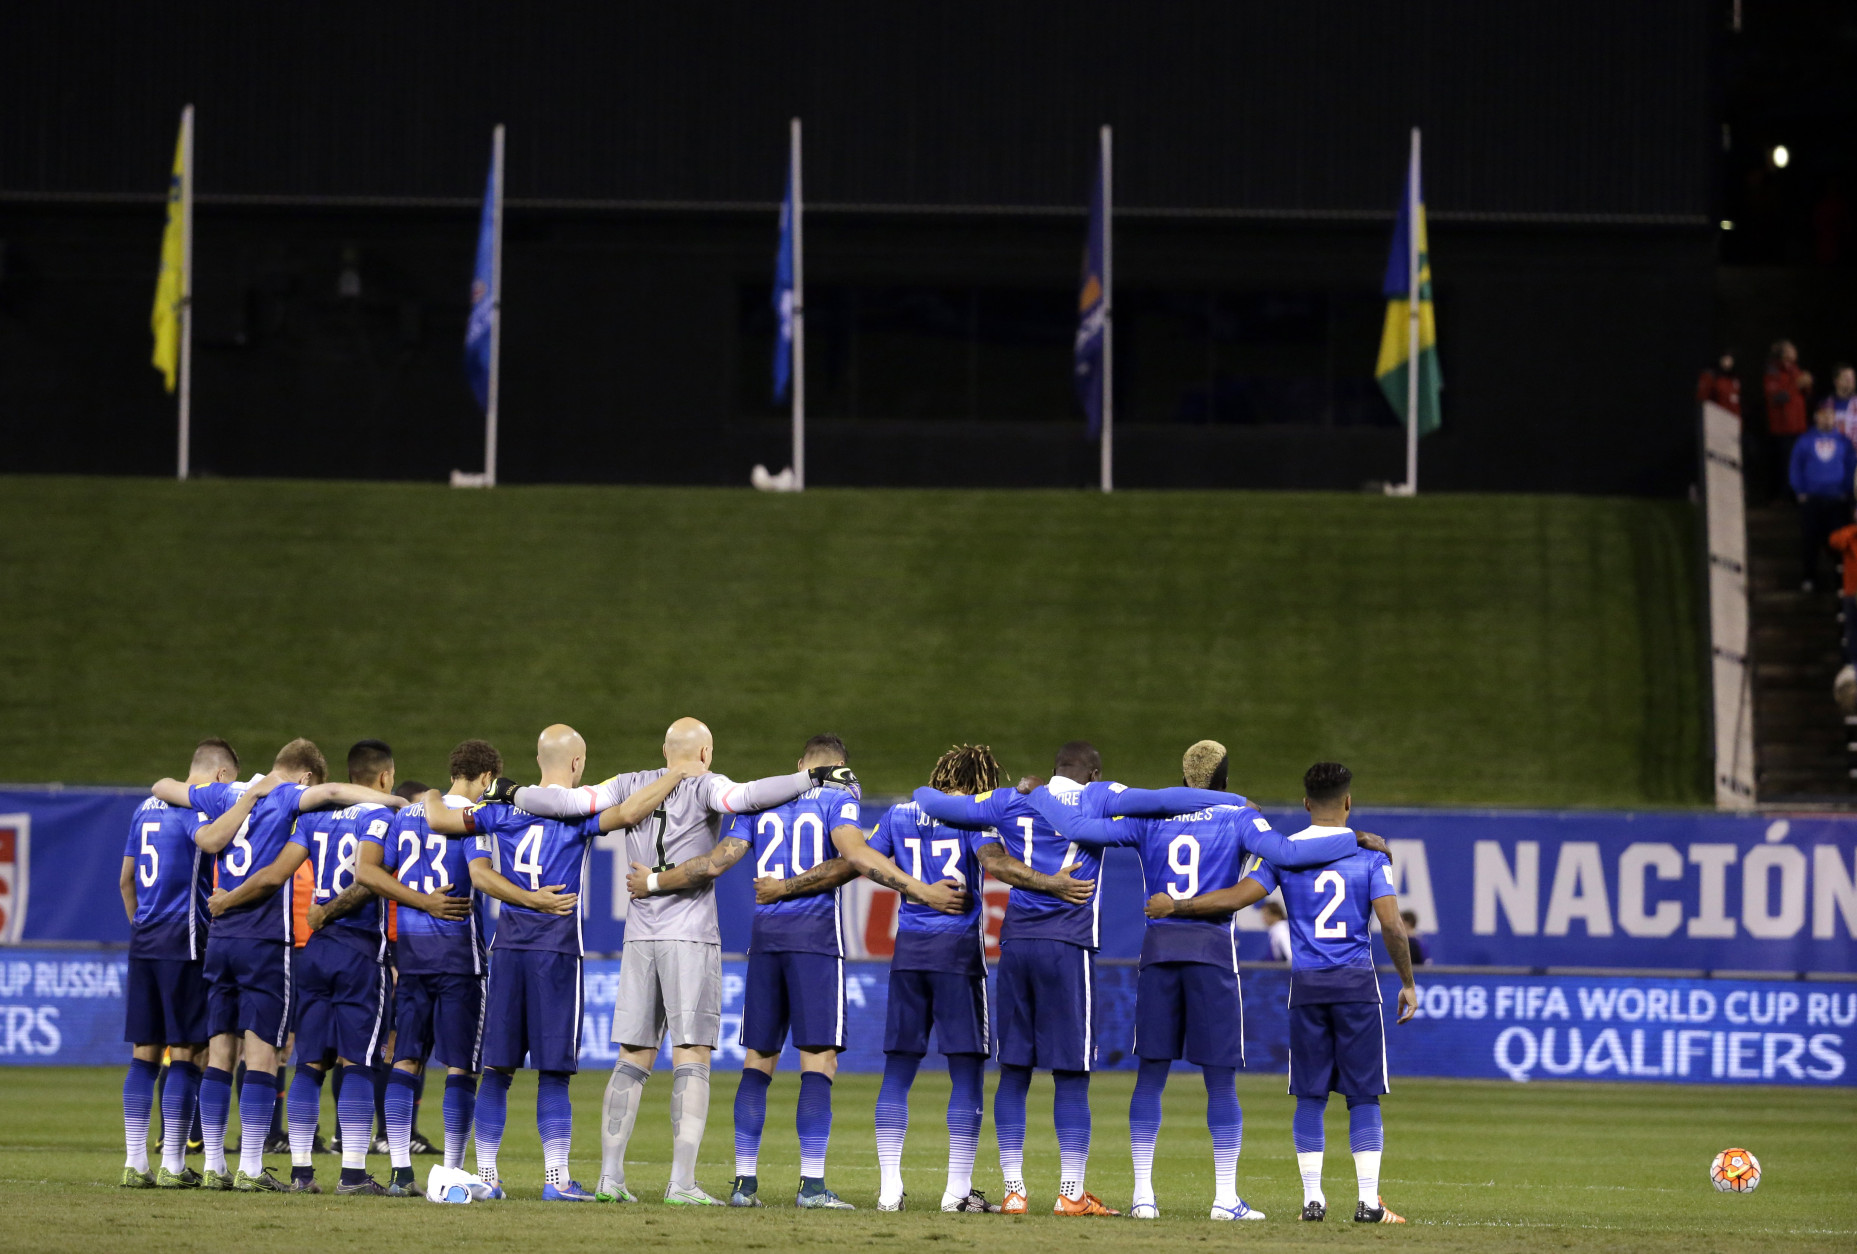 Members of the United States men's national soccer team pauses for a moment of silence to reflect on the events in Paris before the start of a 2018 World Cup qualifying soccer match against St. Vincent and the Grenadines Friday, Nov. 13, 2015, in St. Louis. The United States won 6-1. (AP Photo/Jeff Roberson)